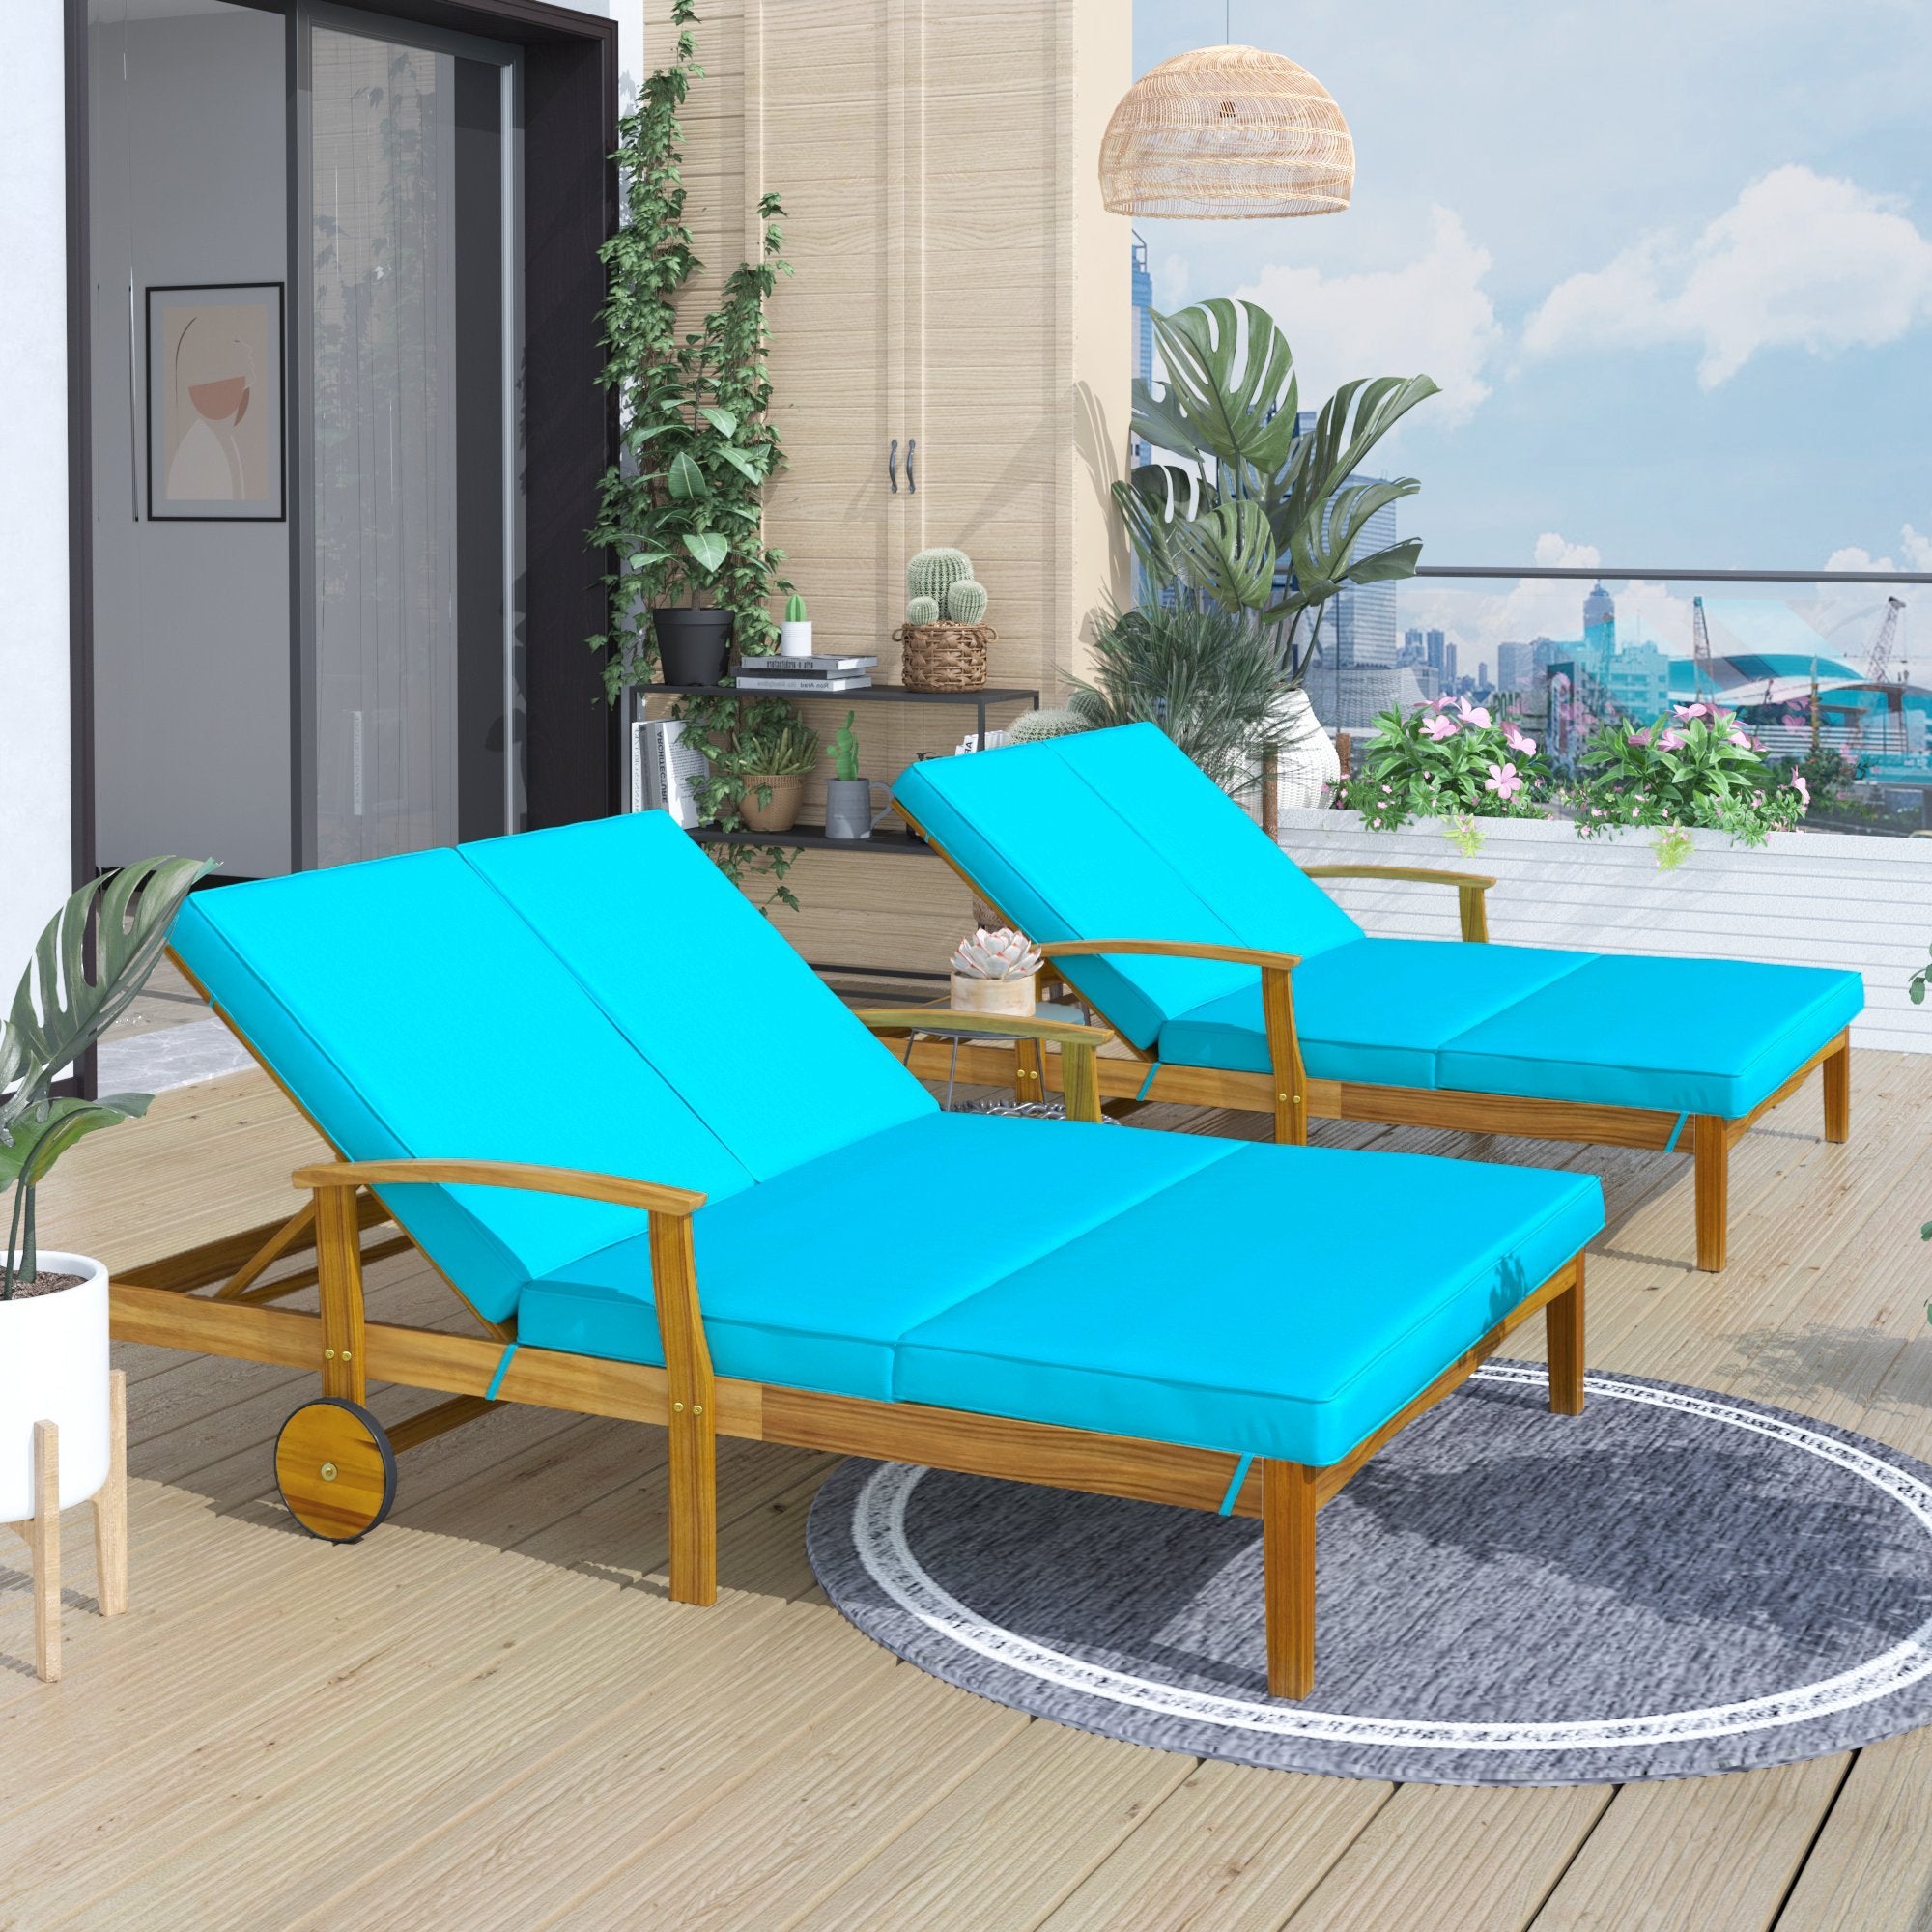 Outdoor Double Chaise Lounge Chair for 2 Persons Patio Backyard Solid Wood Frame Daybed with Cushion and Wheels,Natural Wood Finish+Blue Cushion-Boyel Living